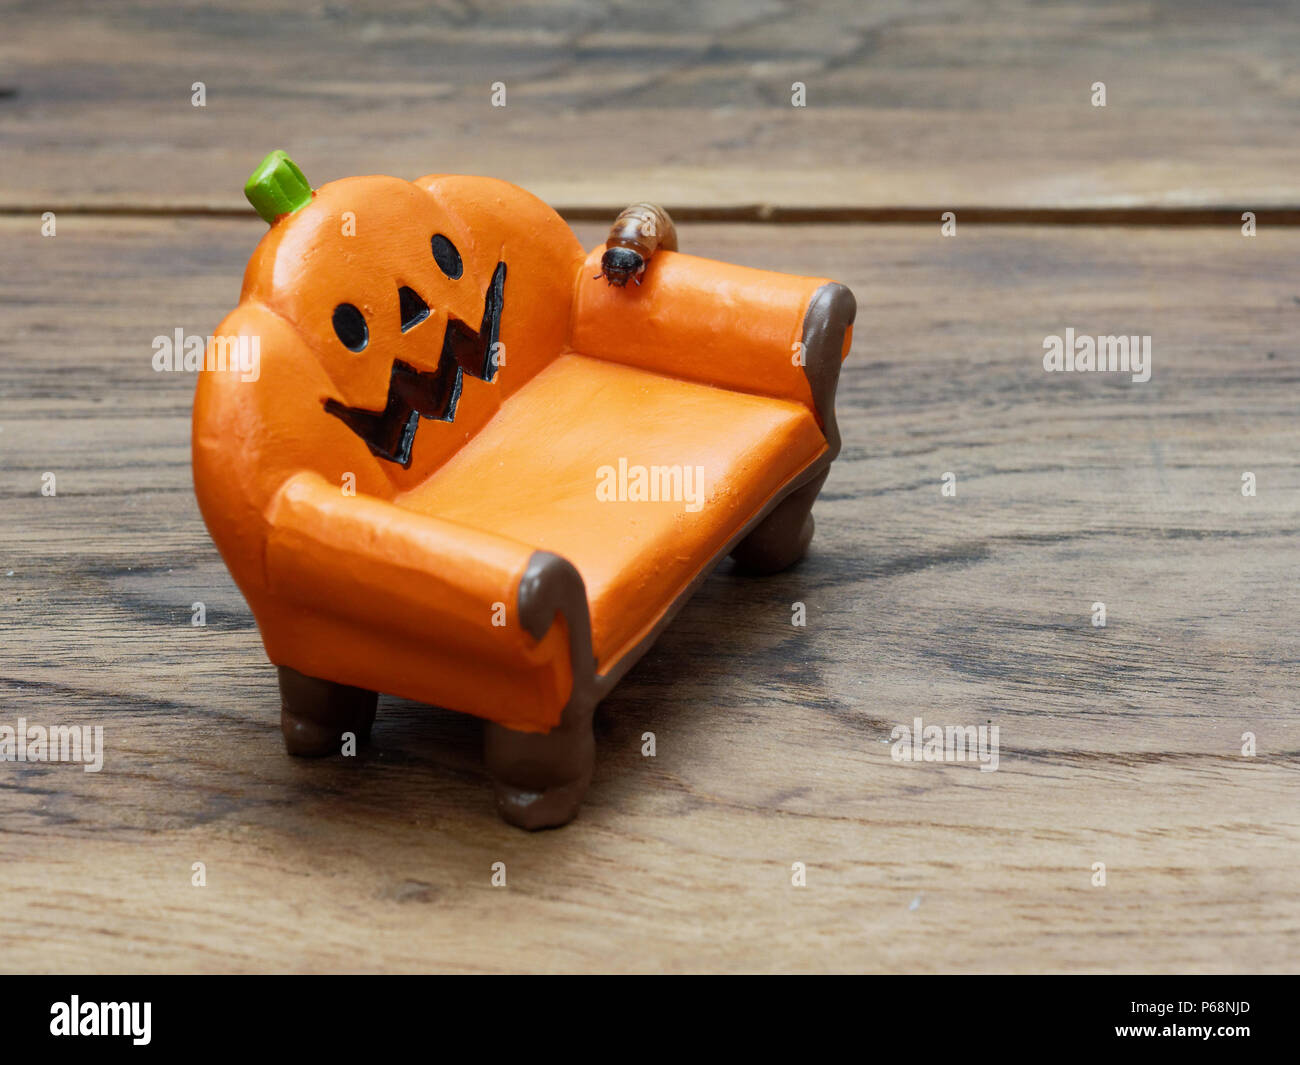 Super or giant worm crawling on orange miniature ceramic pumpkin couch or sofa over dark wooden surface with copy space used as background in Halloween, ornament, celebration, and decoration Stock Photo